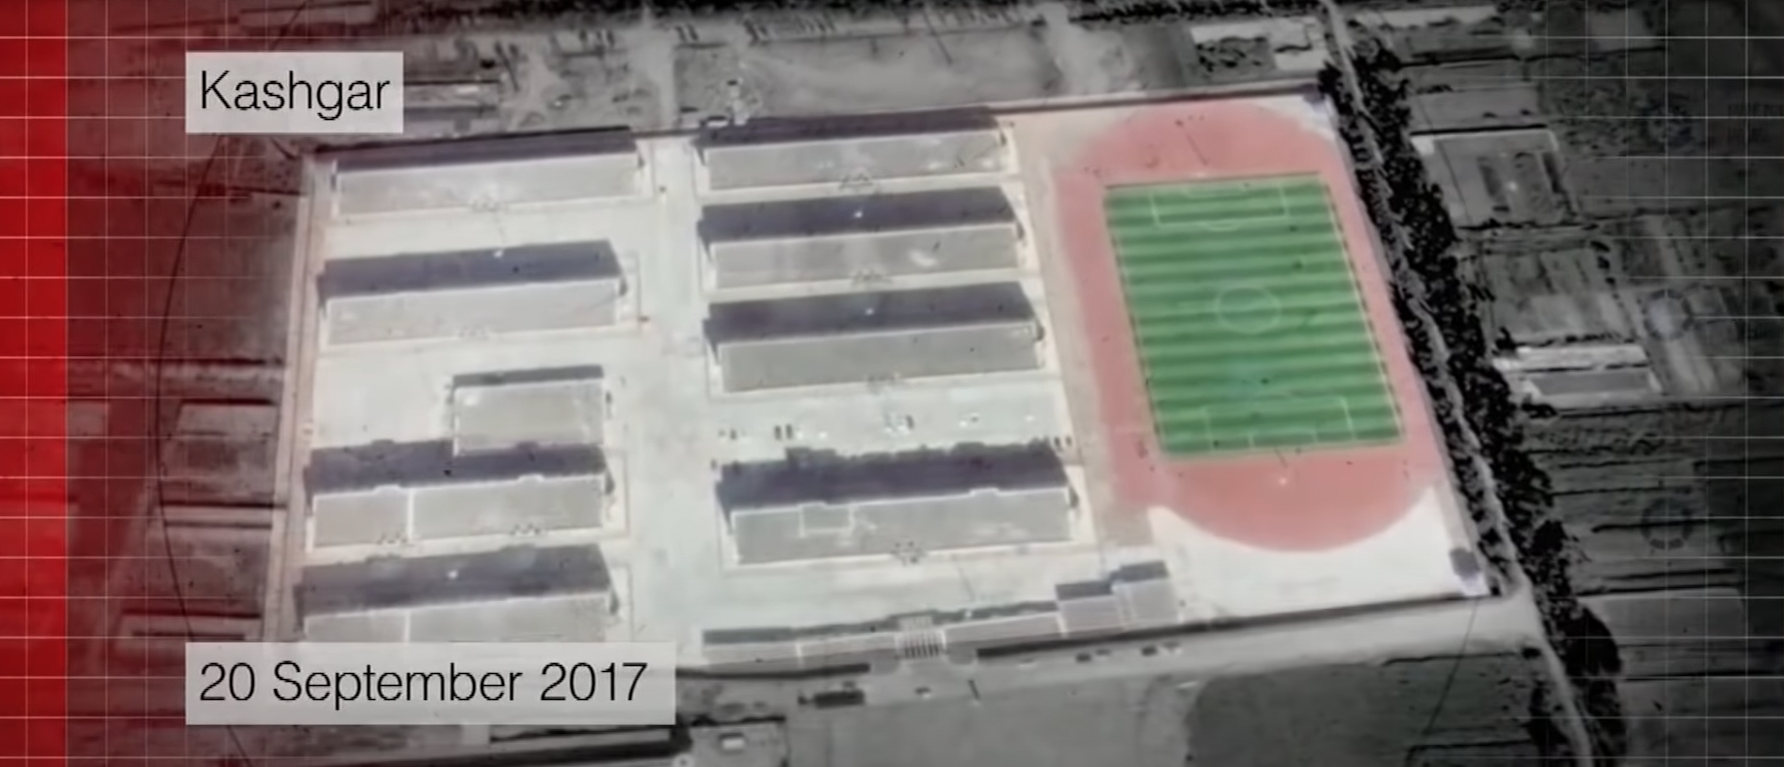 Satellite imagery has captured the construction of massive detention centers across Xinjiang. [YouTube/Screenshot/BBCNews]